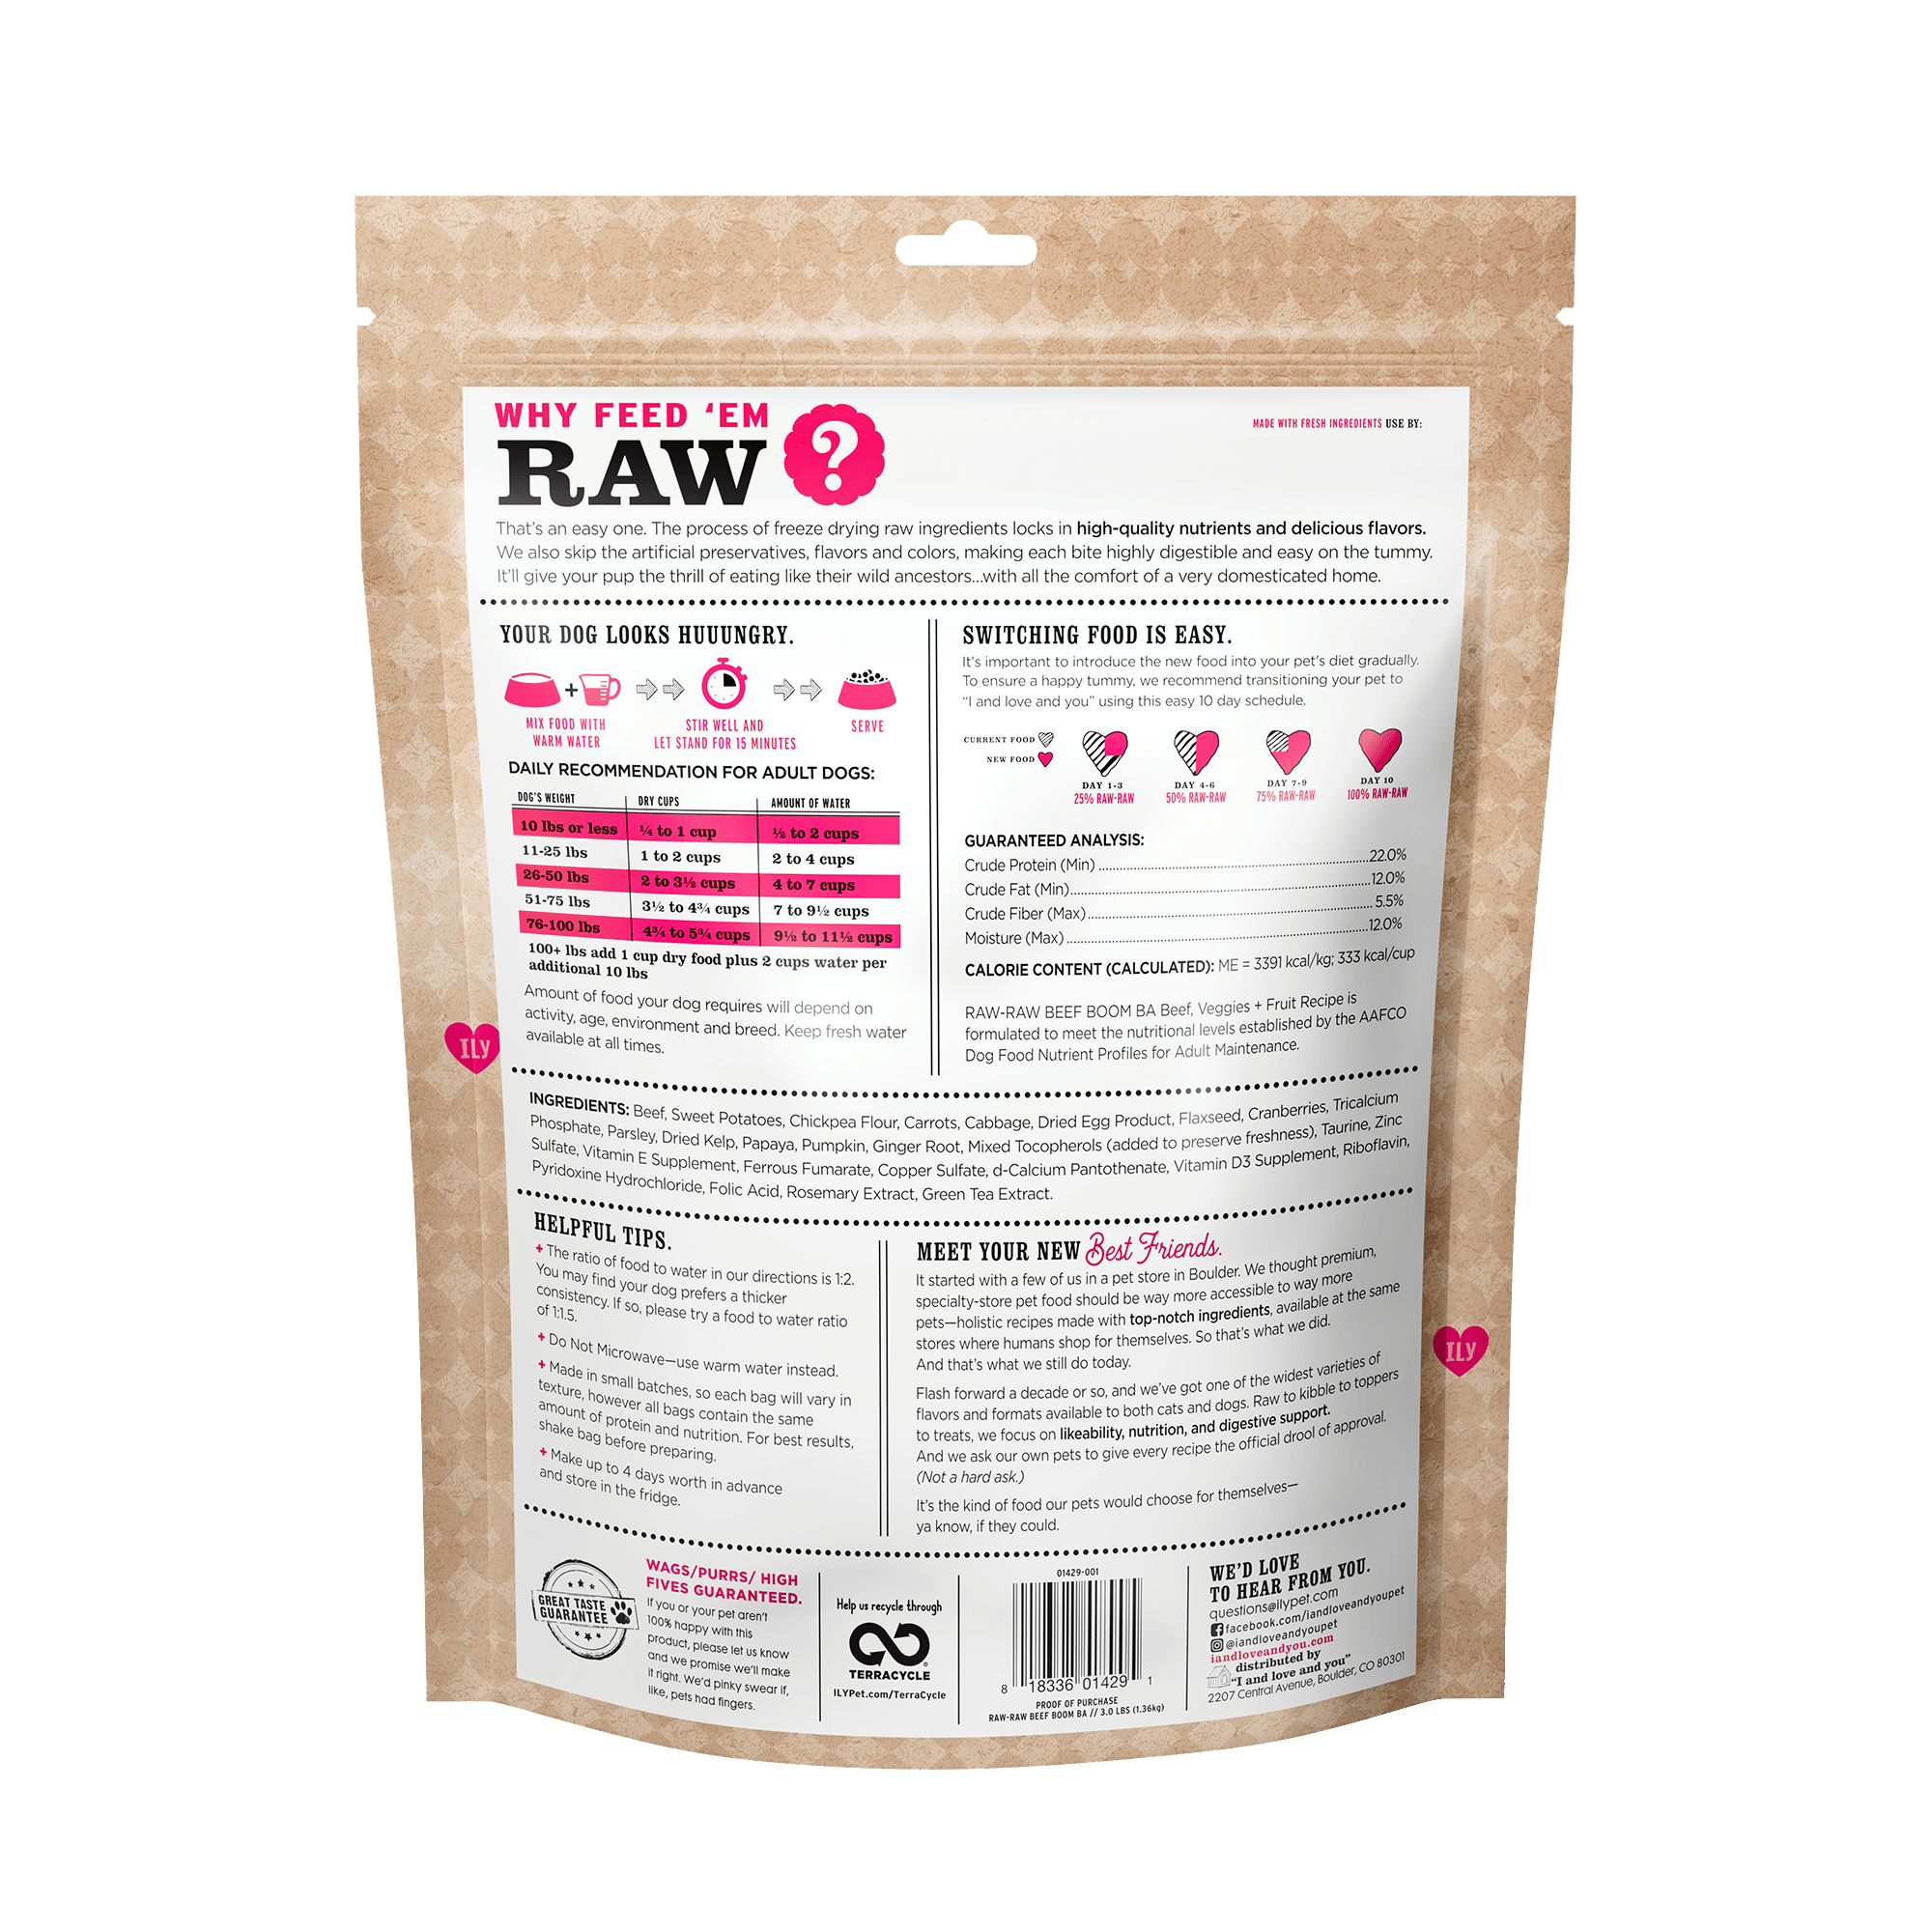 Stir & Boom - Raw Raw Beef Boom Ba: A close-up of a bag with a pink question mark, barcode, and label, showcasing dehydrated dog food ingredients.